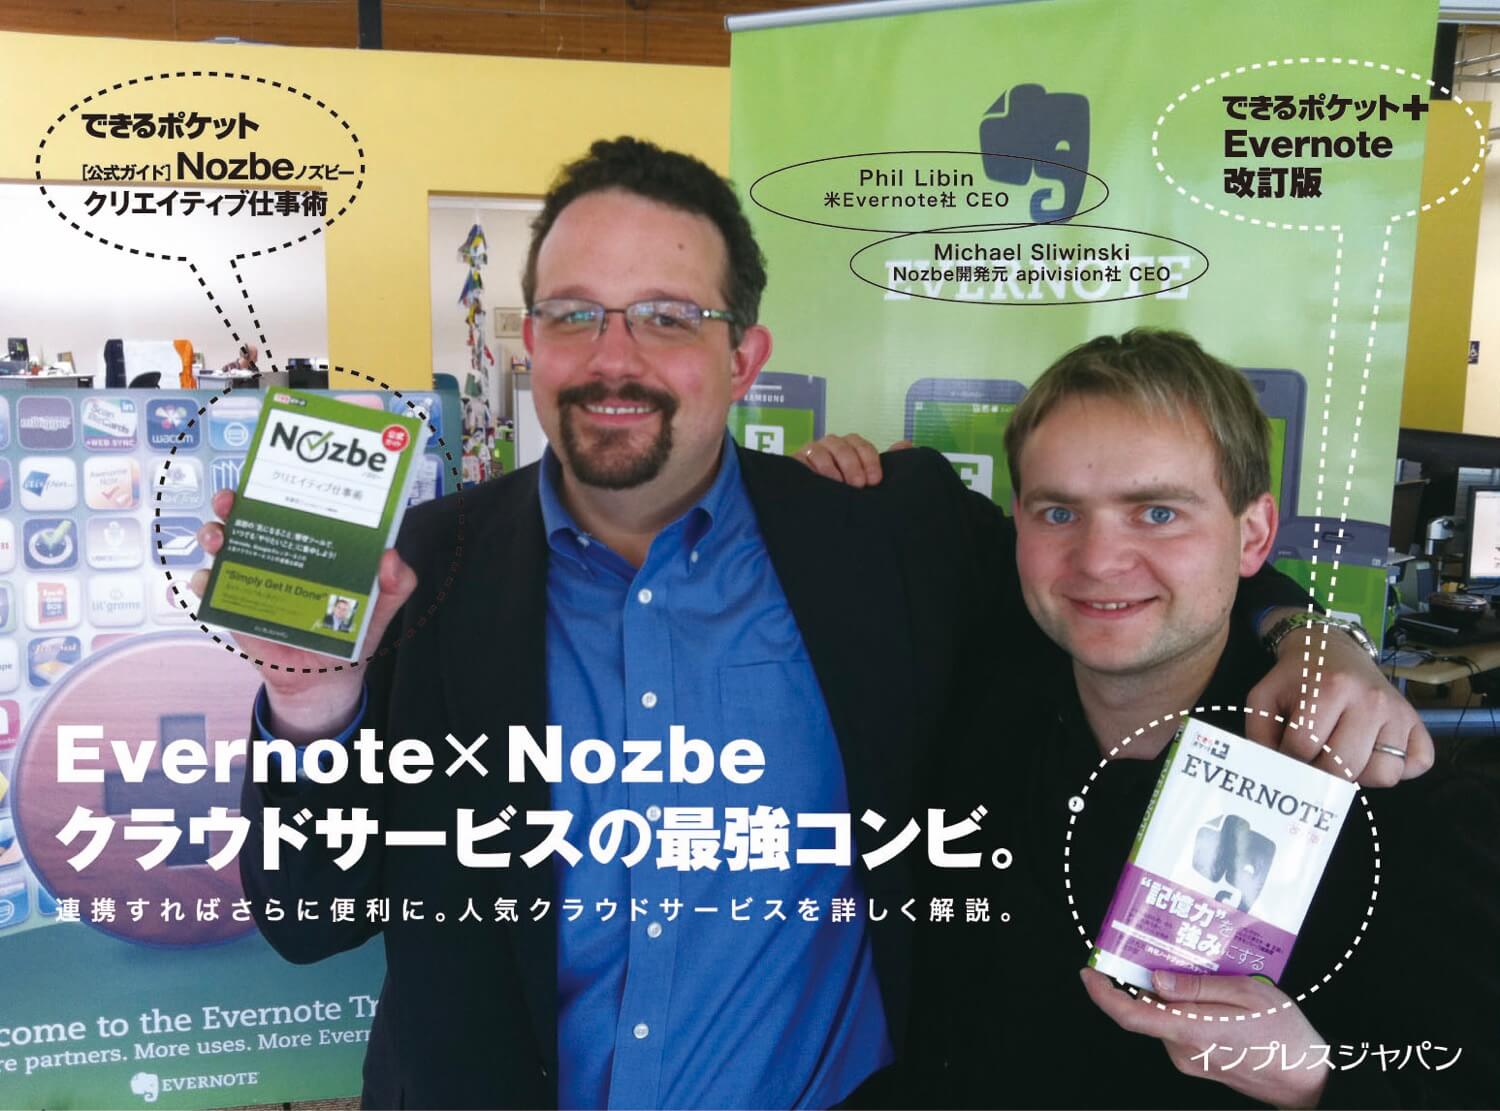 Evernote - why I love(d) it, how it almost acquired Nozbe and what’s next for your “external brain”? phil libin